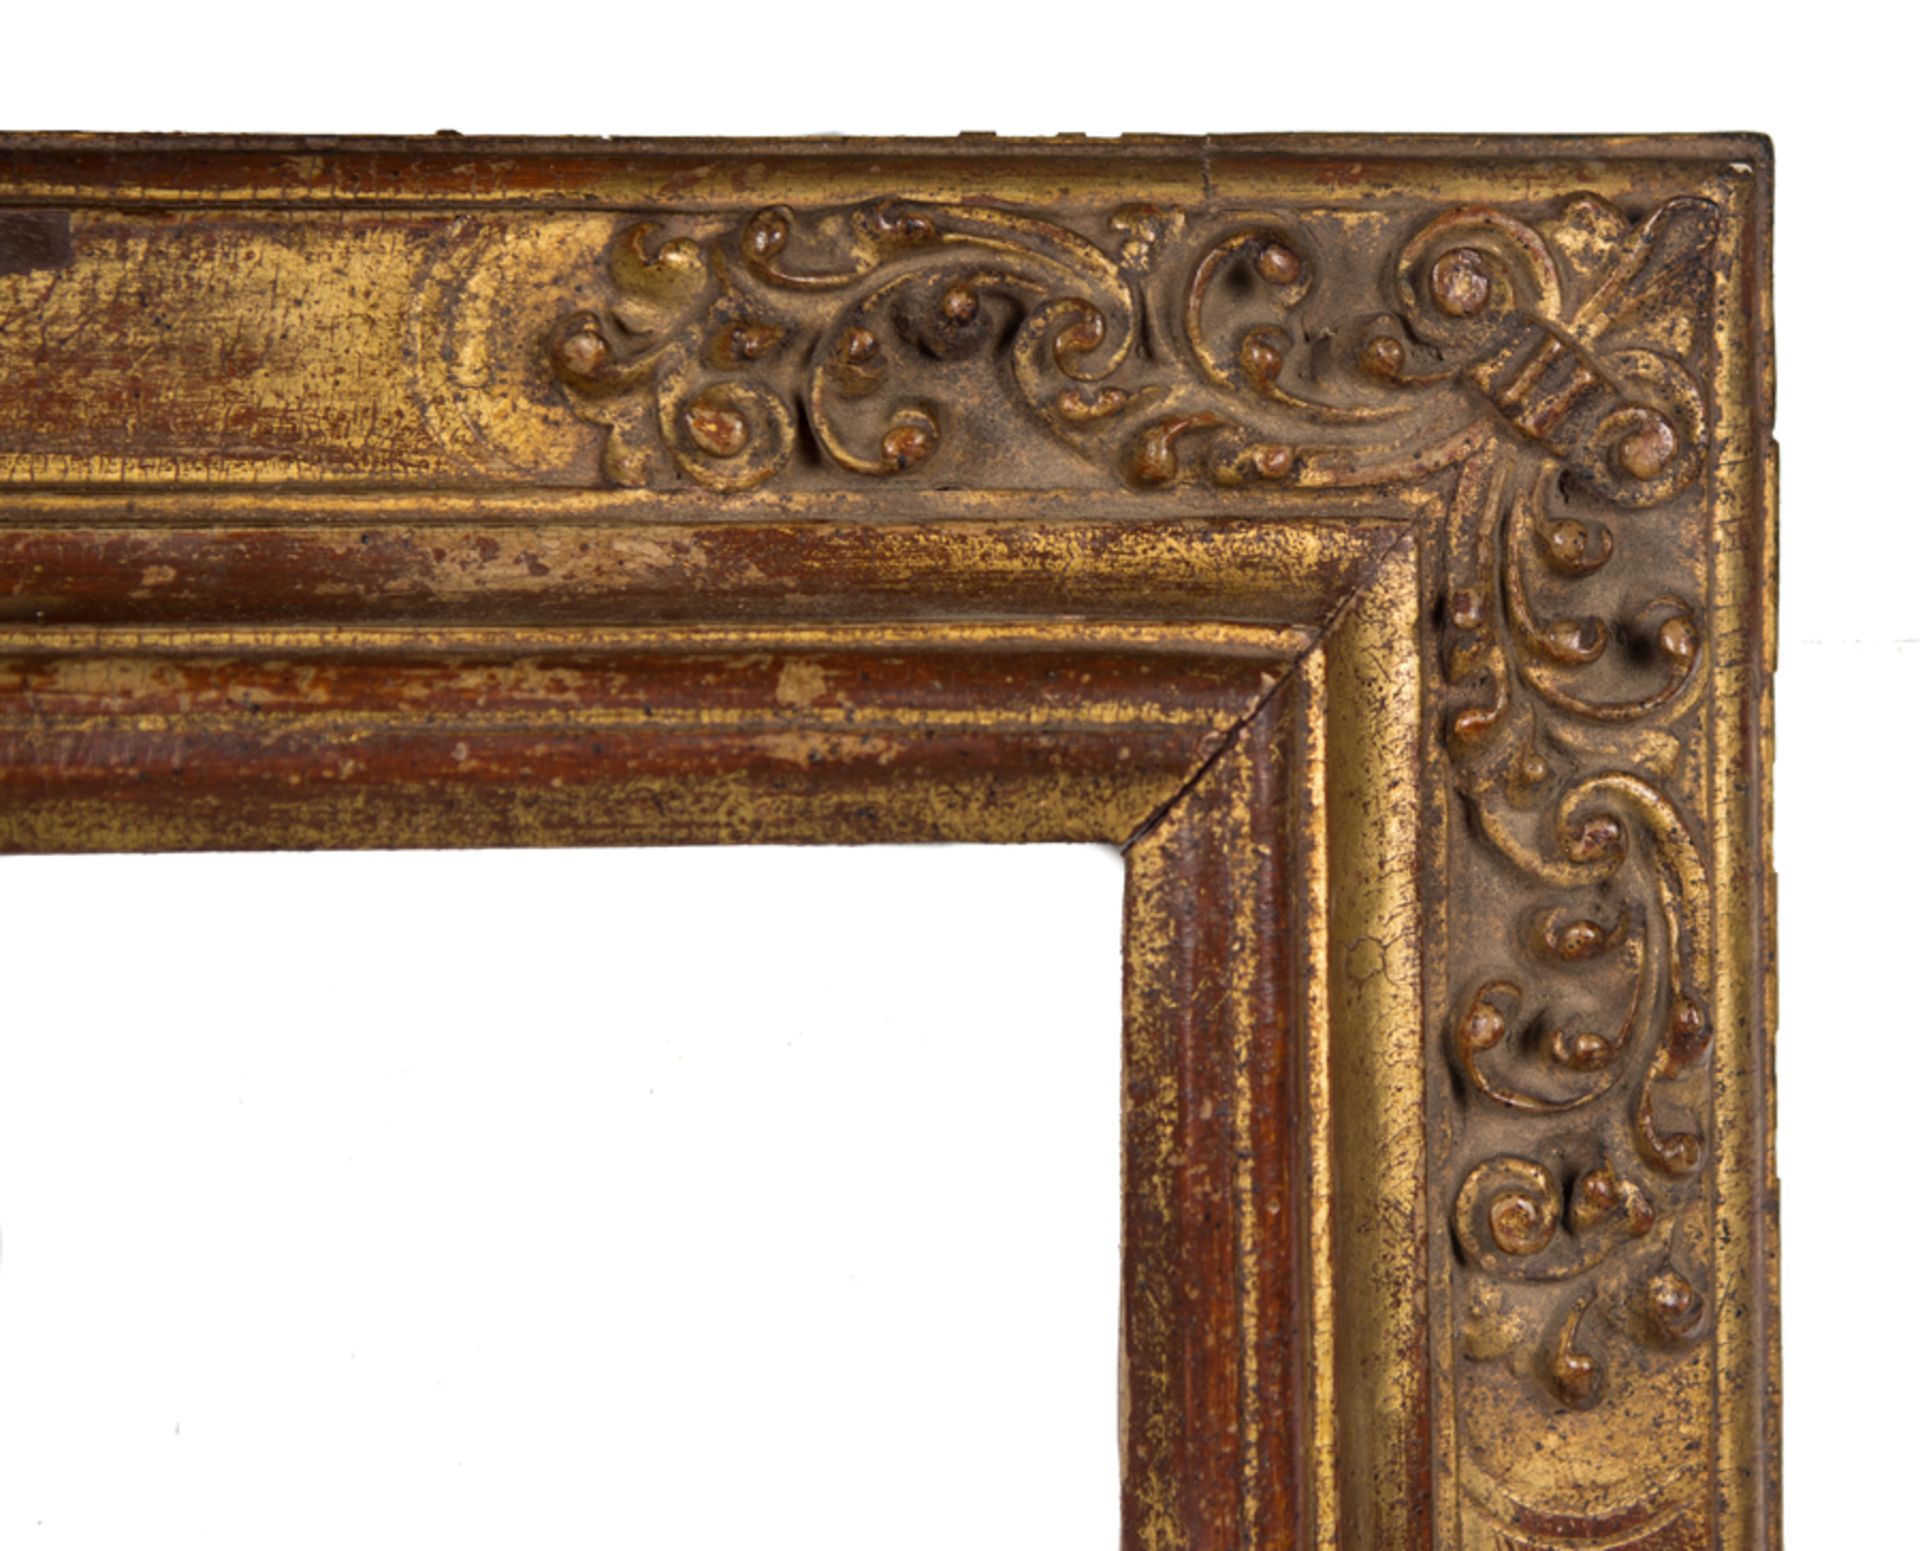 Carved and gilded wooden frame. Spanish work. 17th - 18th century. - Bild 2 aus 3